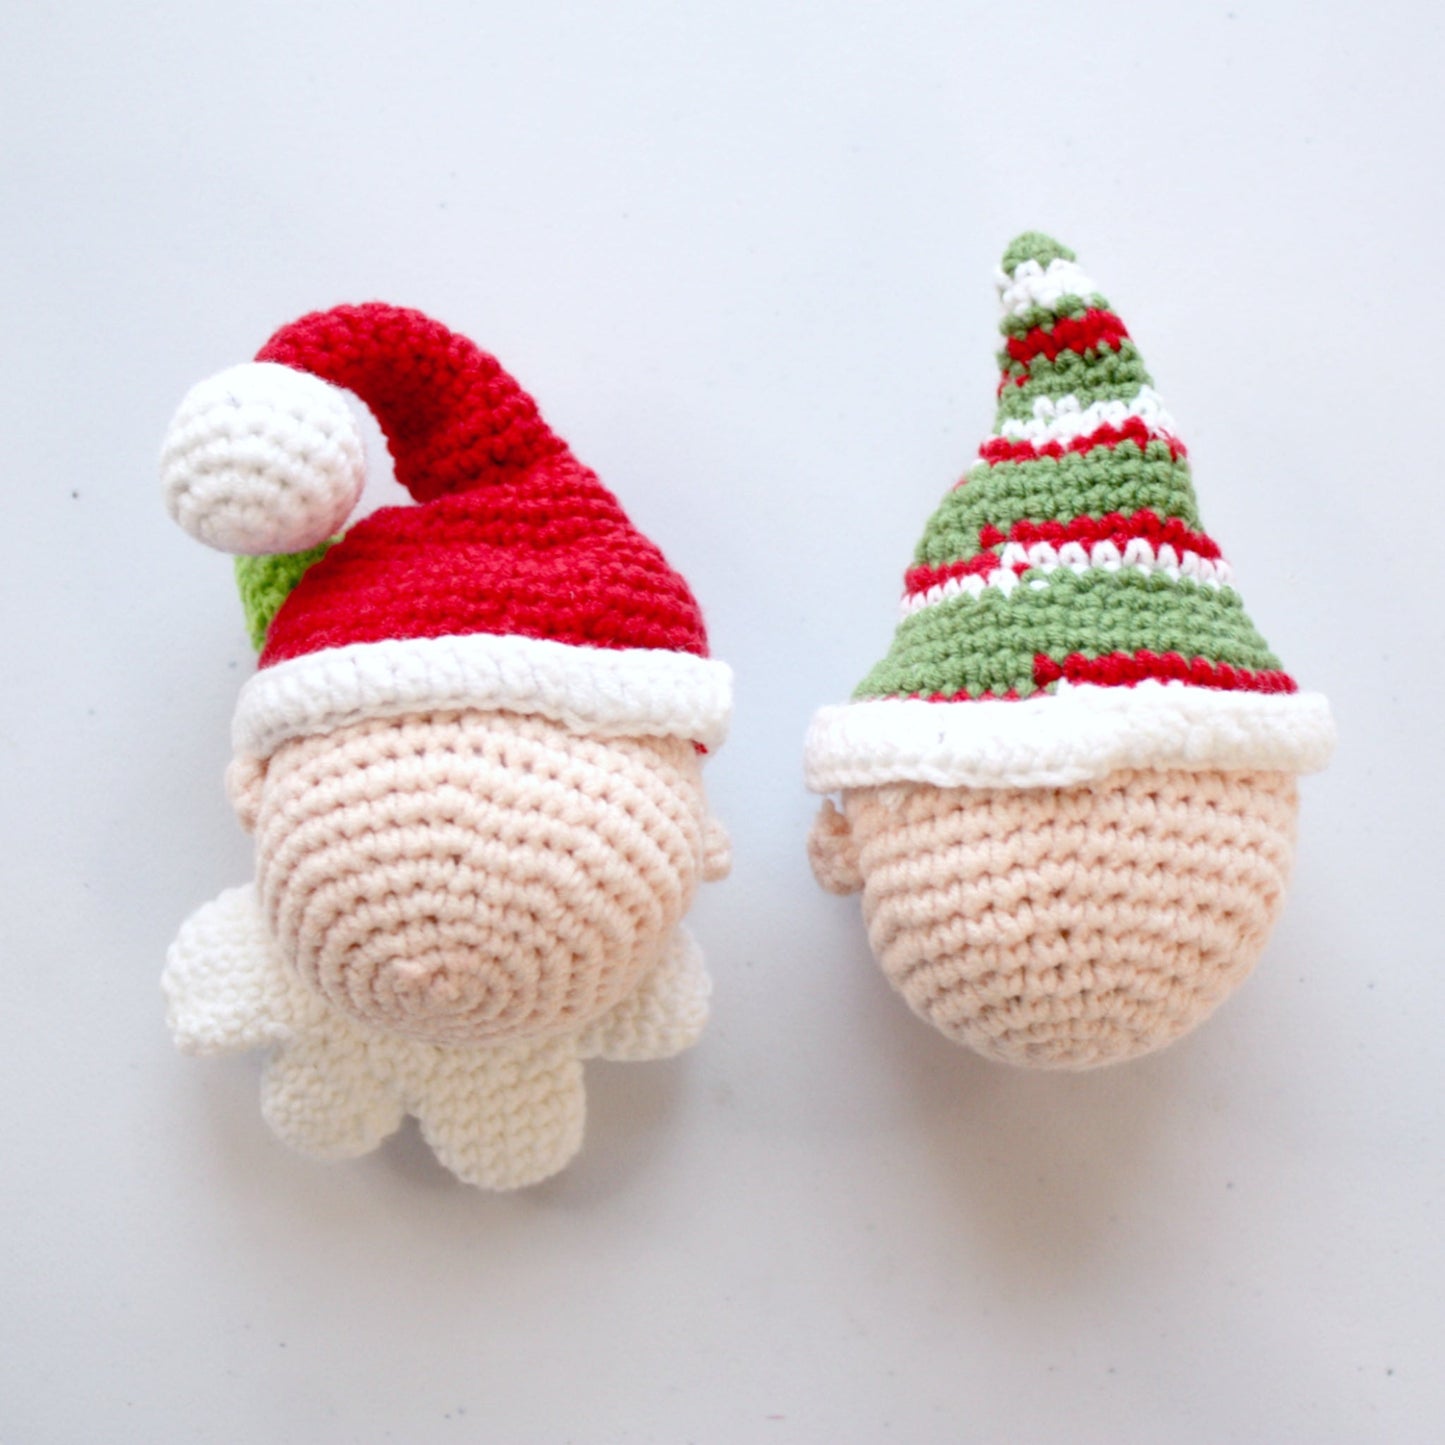 Crocheted Santa and Elf Christmas Decorations - Made in the USA